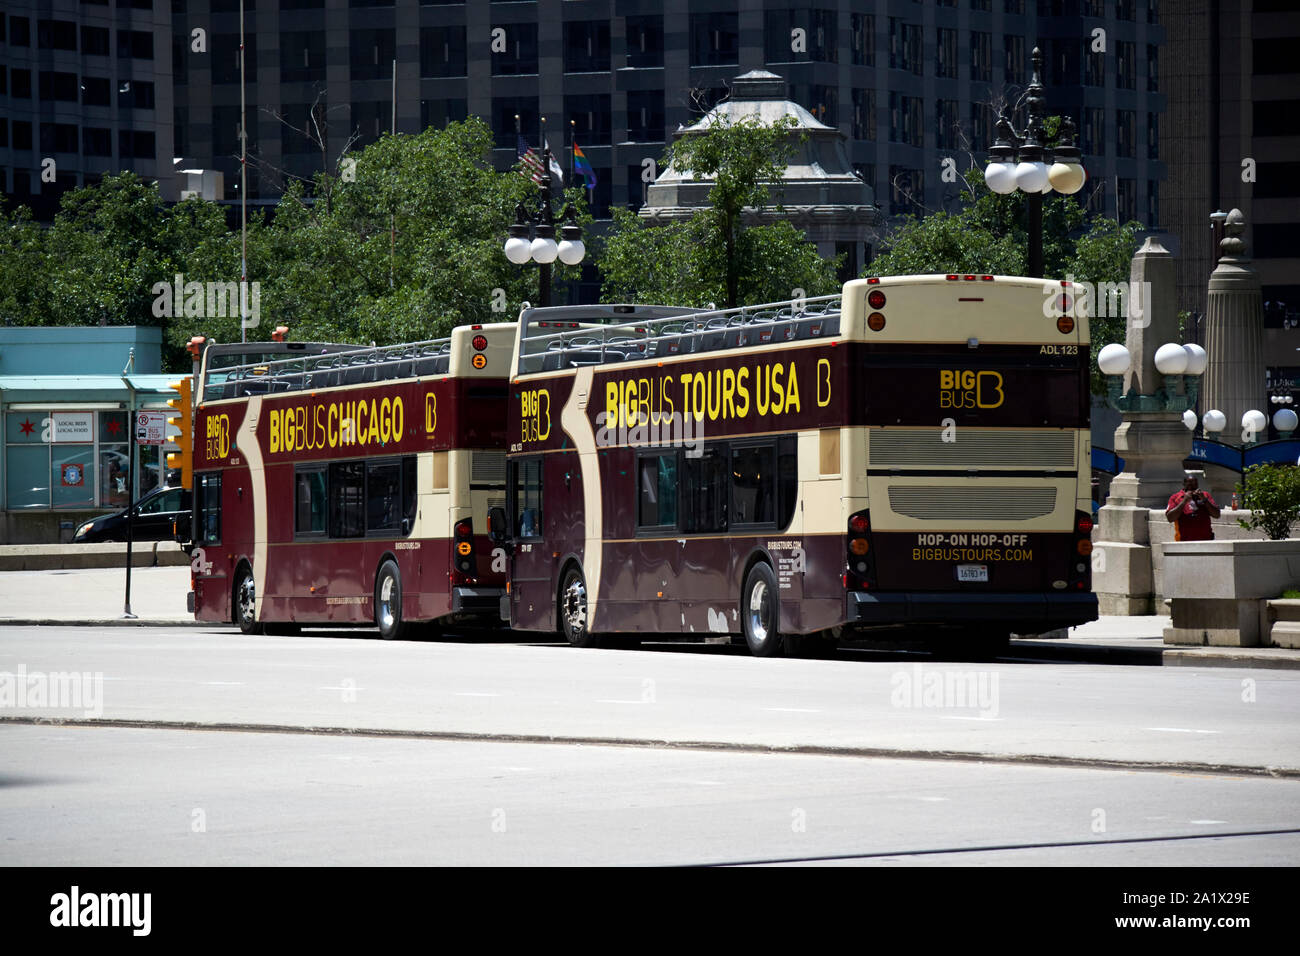 big bus chicago open top guided bus tour busses parked at wacker drive stop chicago illinois united states of america Stock Photo